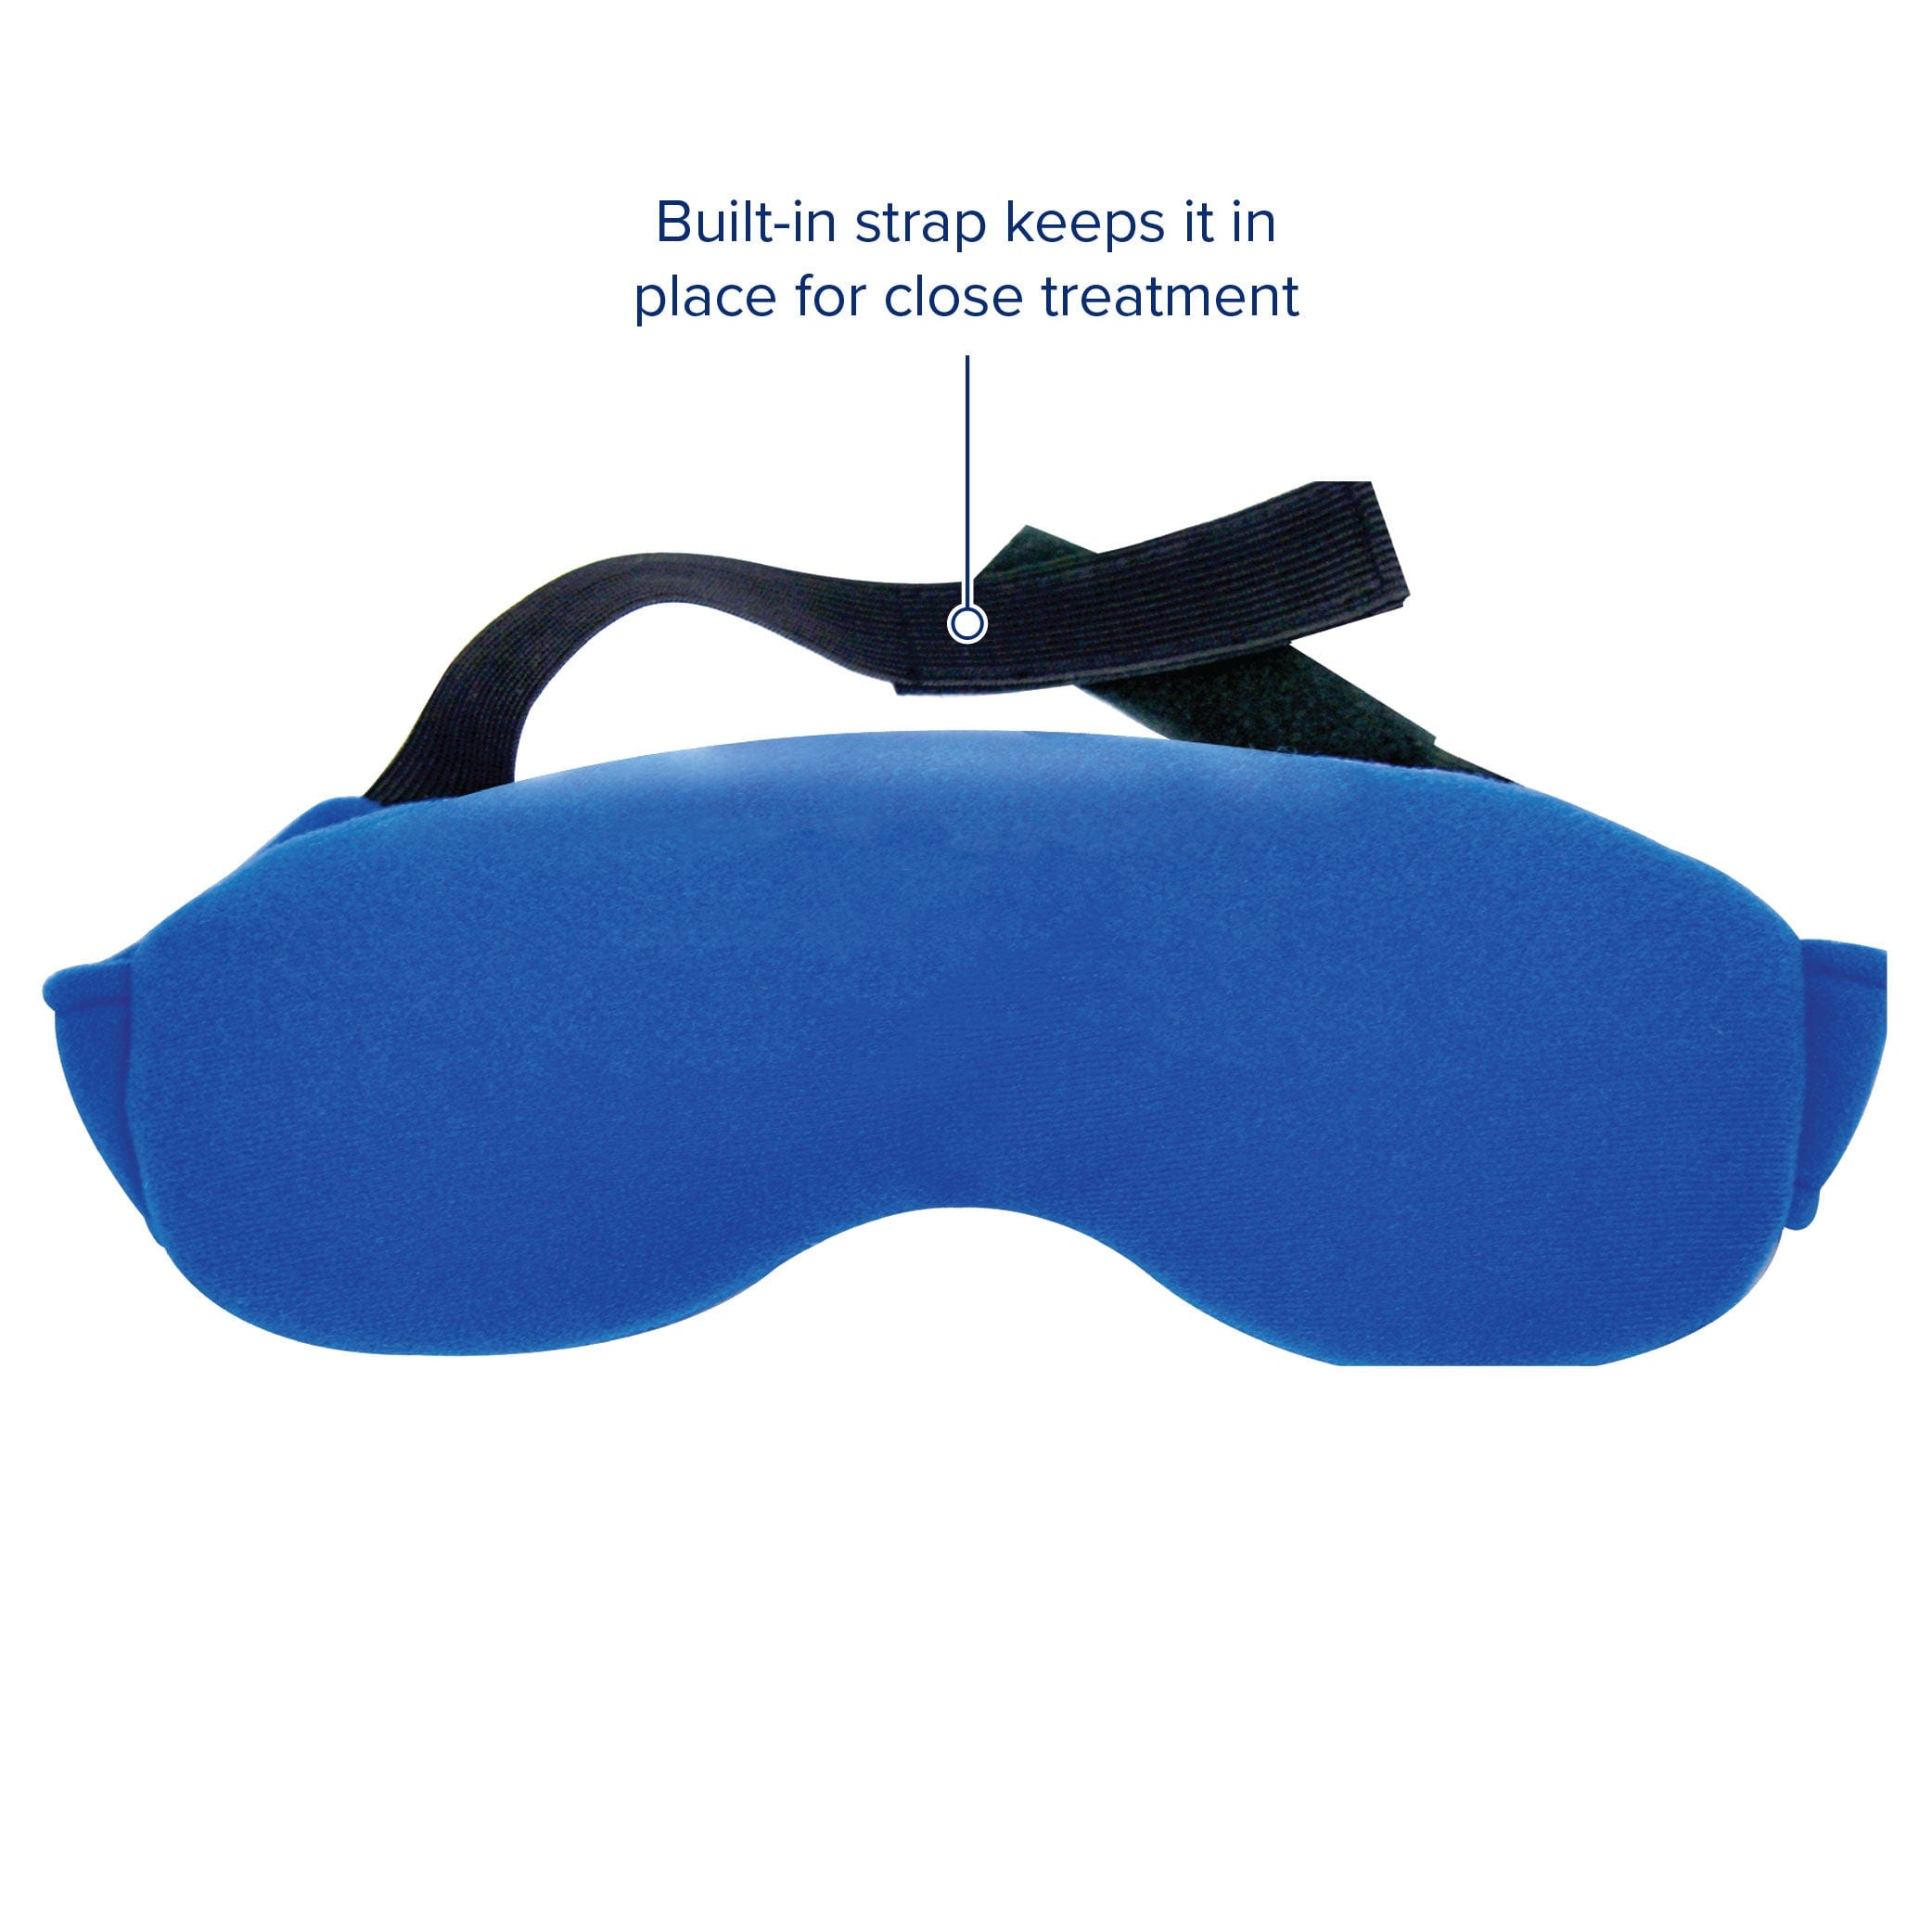 Bed Buddy Sinus Pack - Built-in strap keeps it in place for close treatment